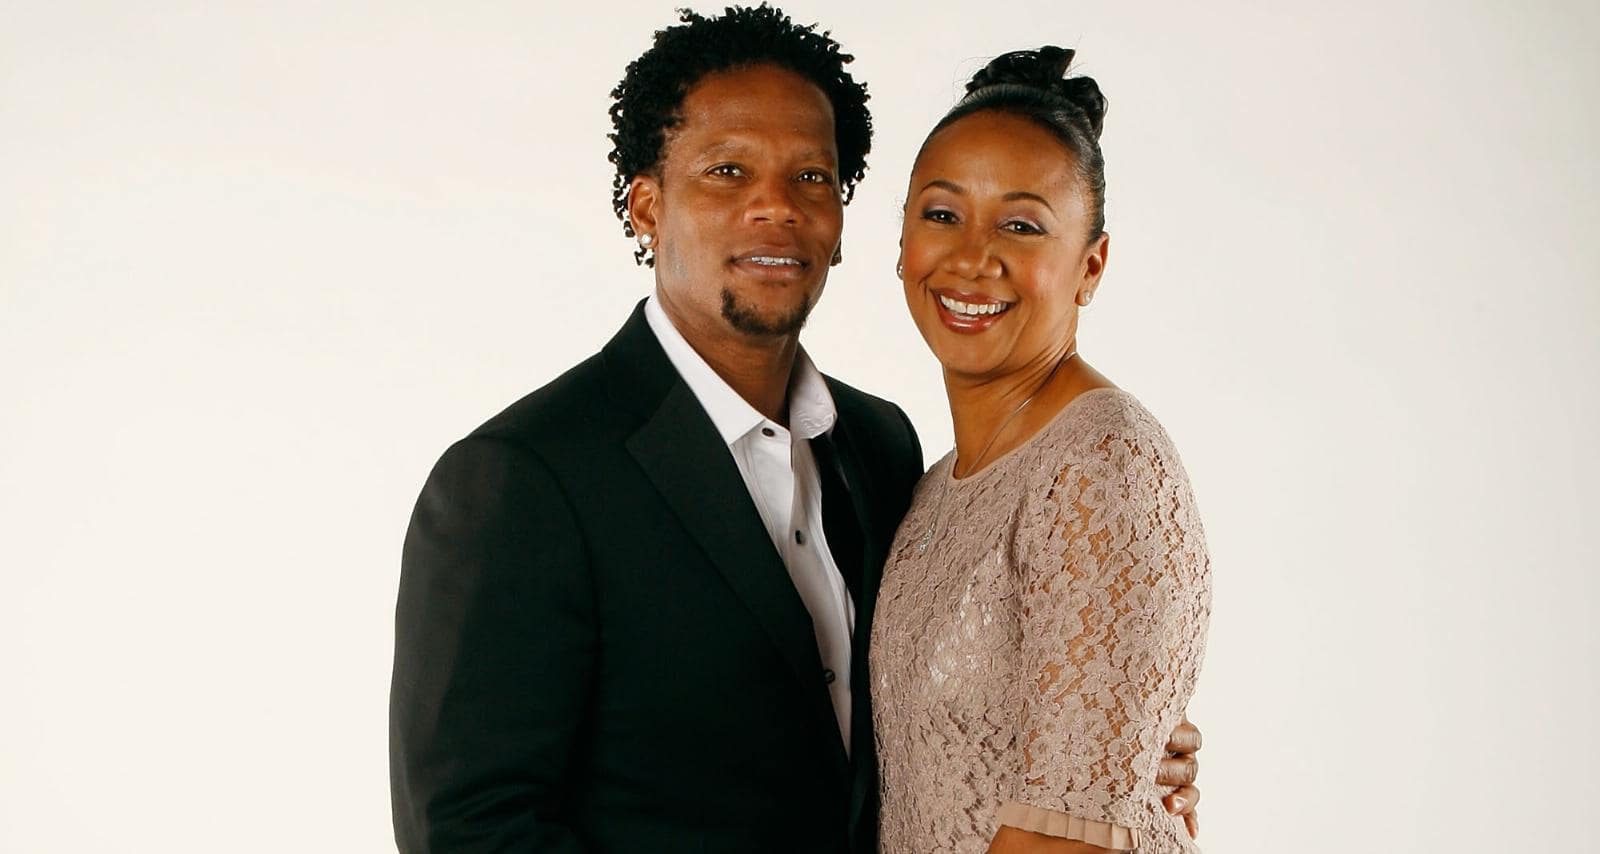 Ladonna Hughley Wiki, Age, Family, Parents, Kids and Facts About DL Hughley’s Wife